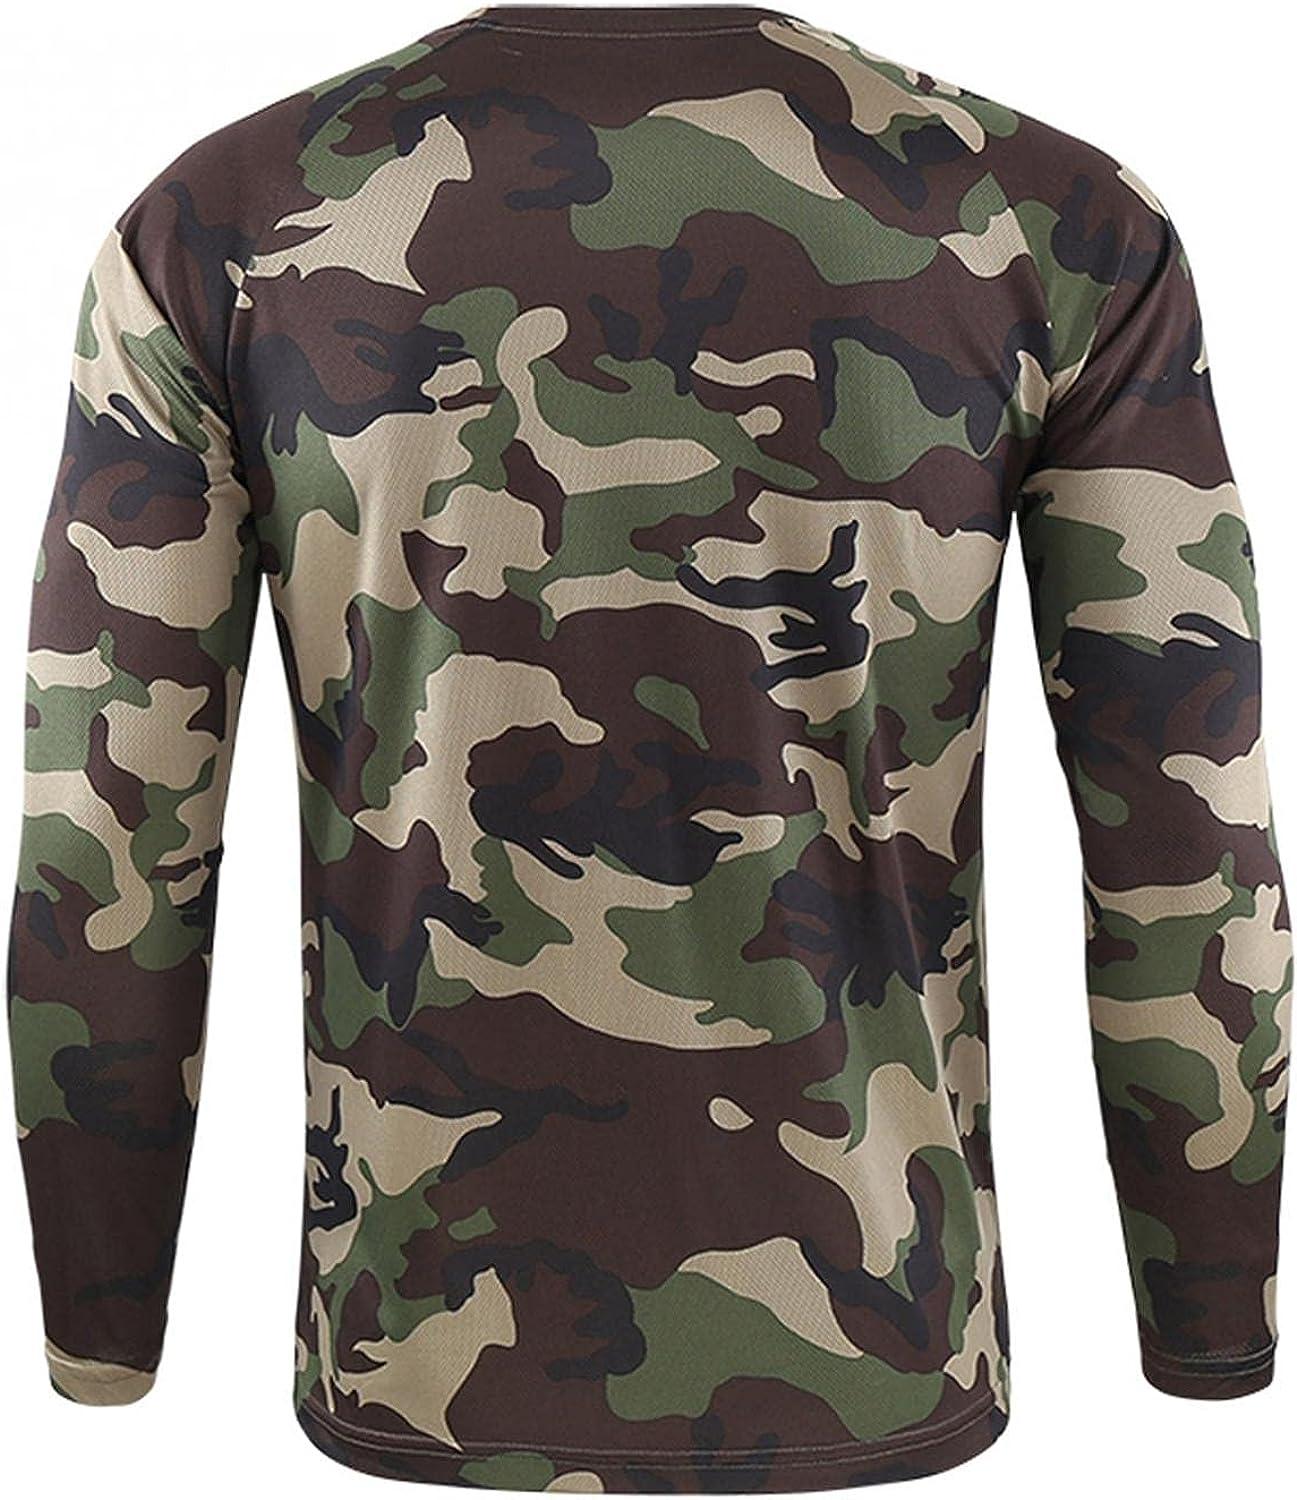 JSPOYOU Mens Camouflage Long Sleeve Athletic Shirts Fitness Military  Crewneck Vintage Camo T-Shirts Slim Fit Dry Cool Tops, Green